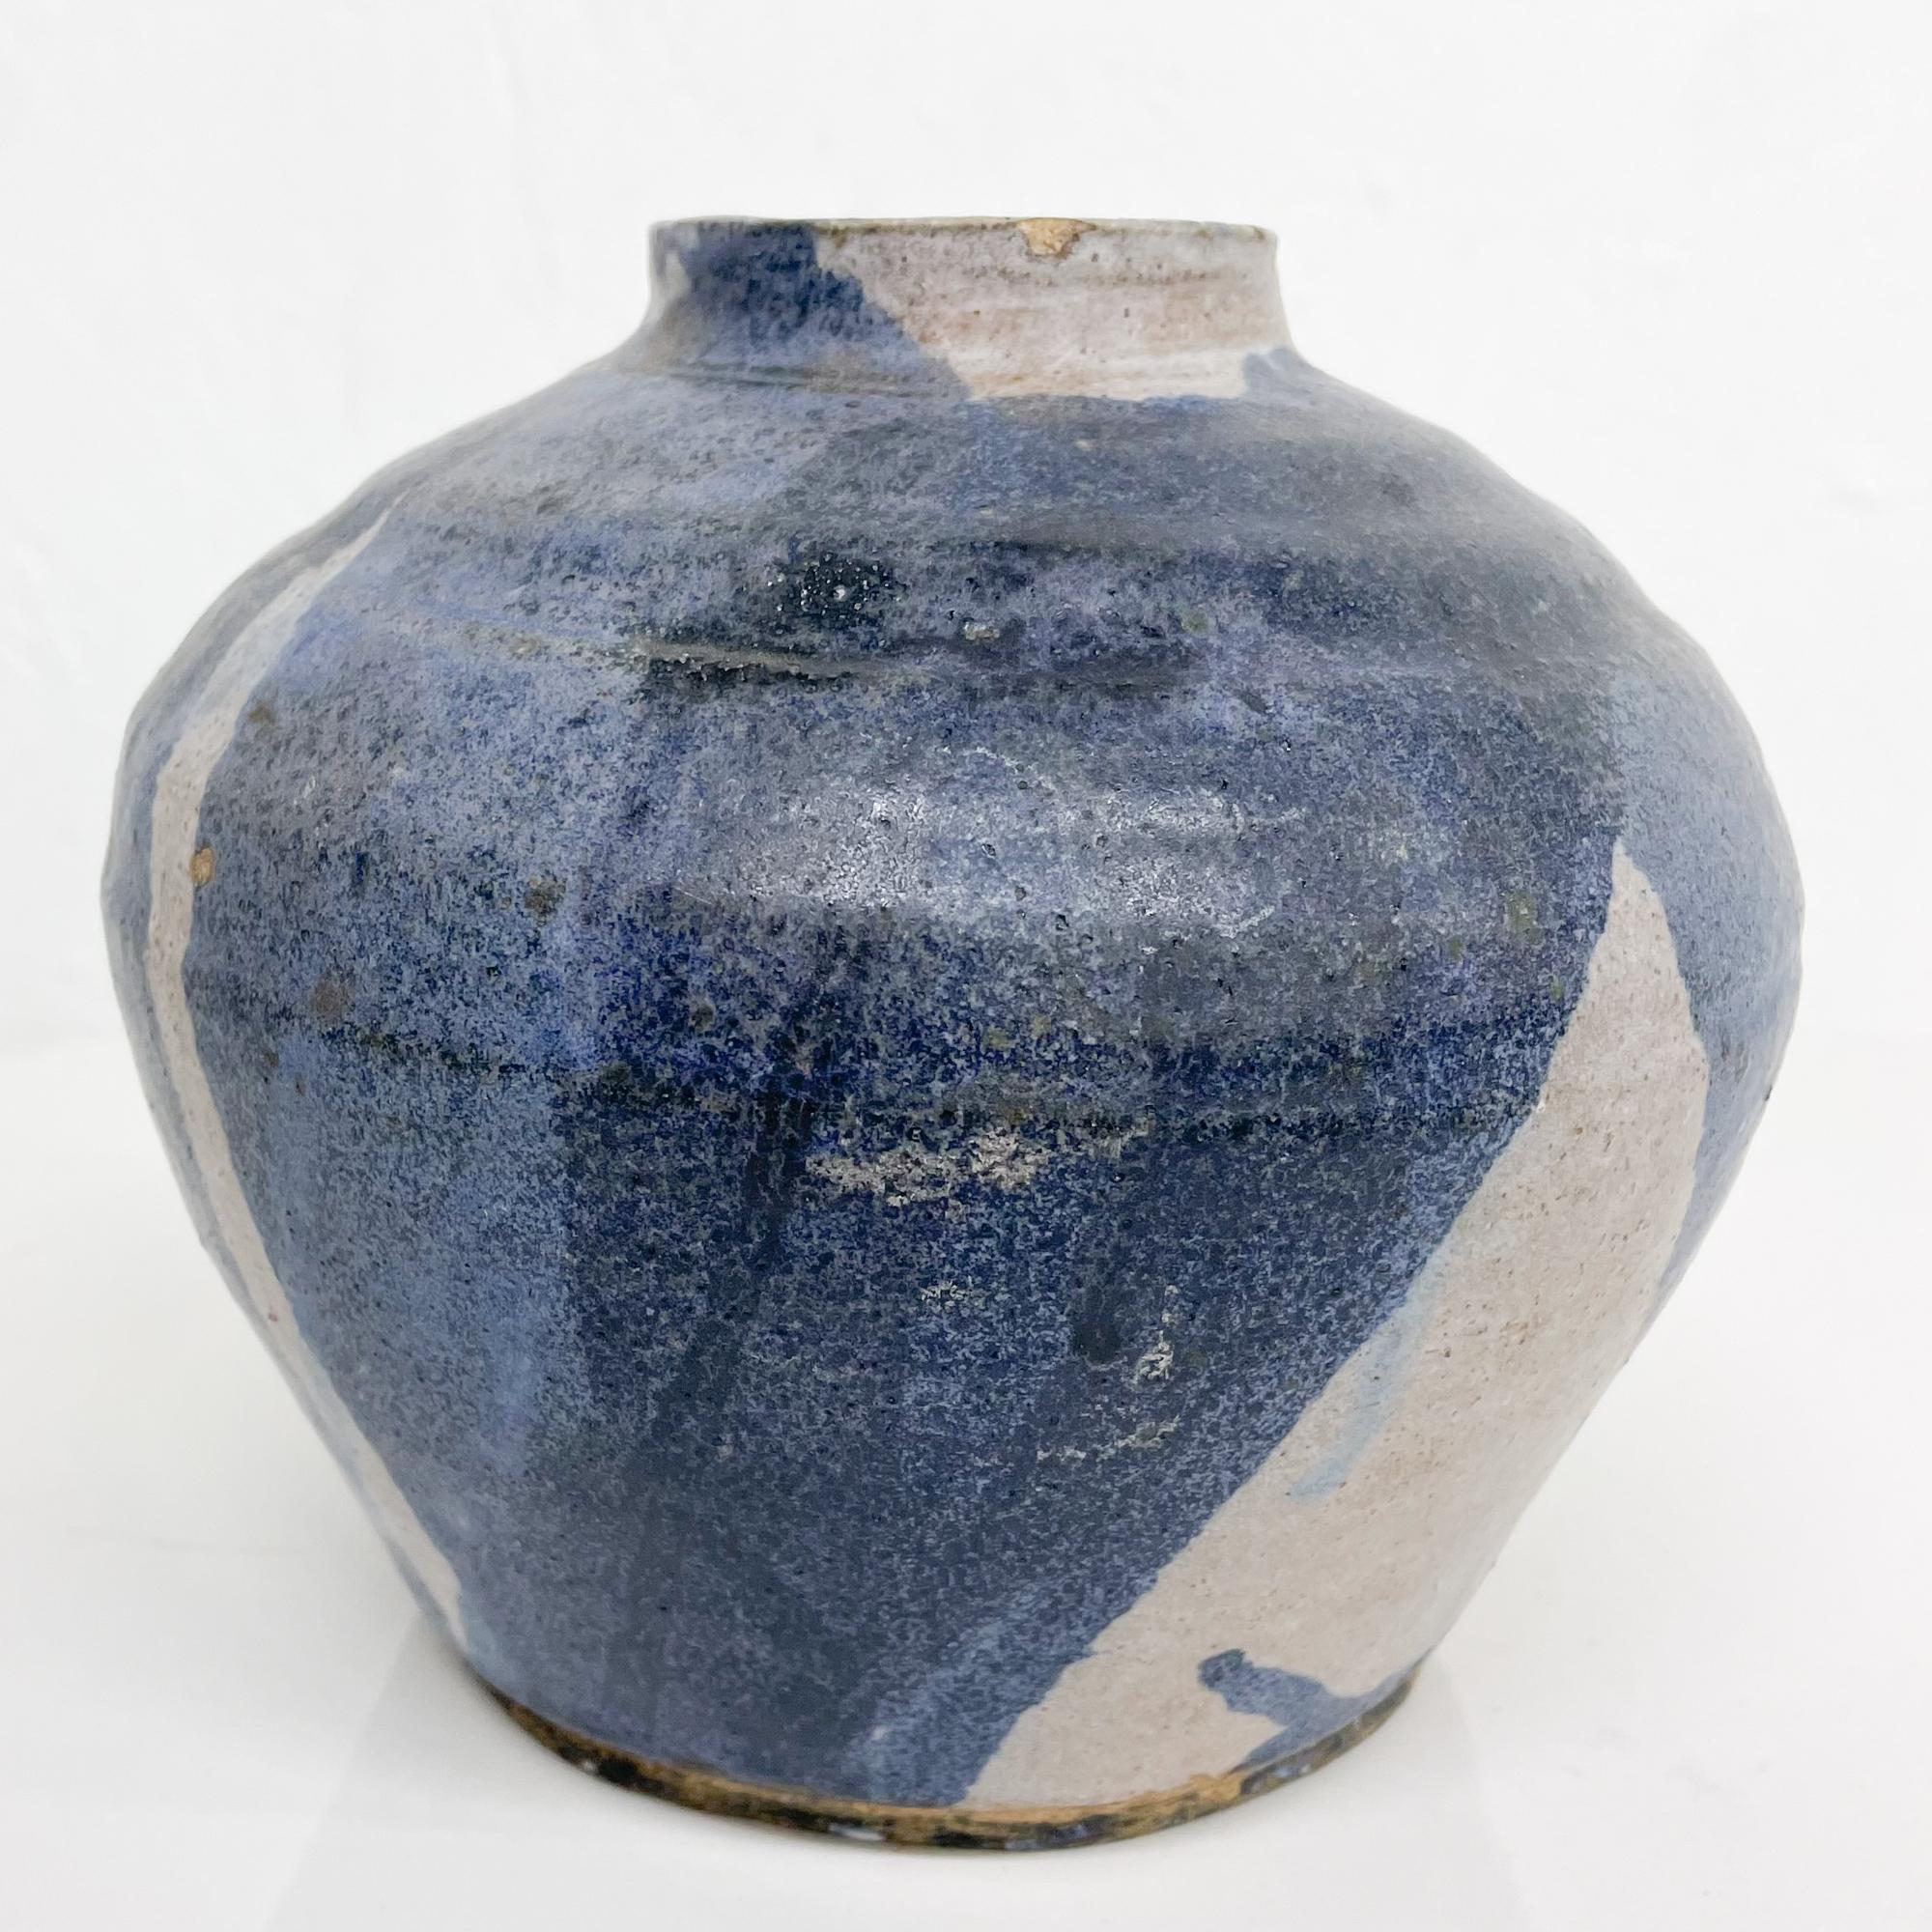 For your consideration: Vase in swirling shades of blue ceramic Art Pottery Mid-Century Modern
Wide mouth fat base
Stamped underneath. Unable to read name. Small hole at bottom as pictured.
Measures: 6.75 in diameter x 7.5 tall inches
Preowned